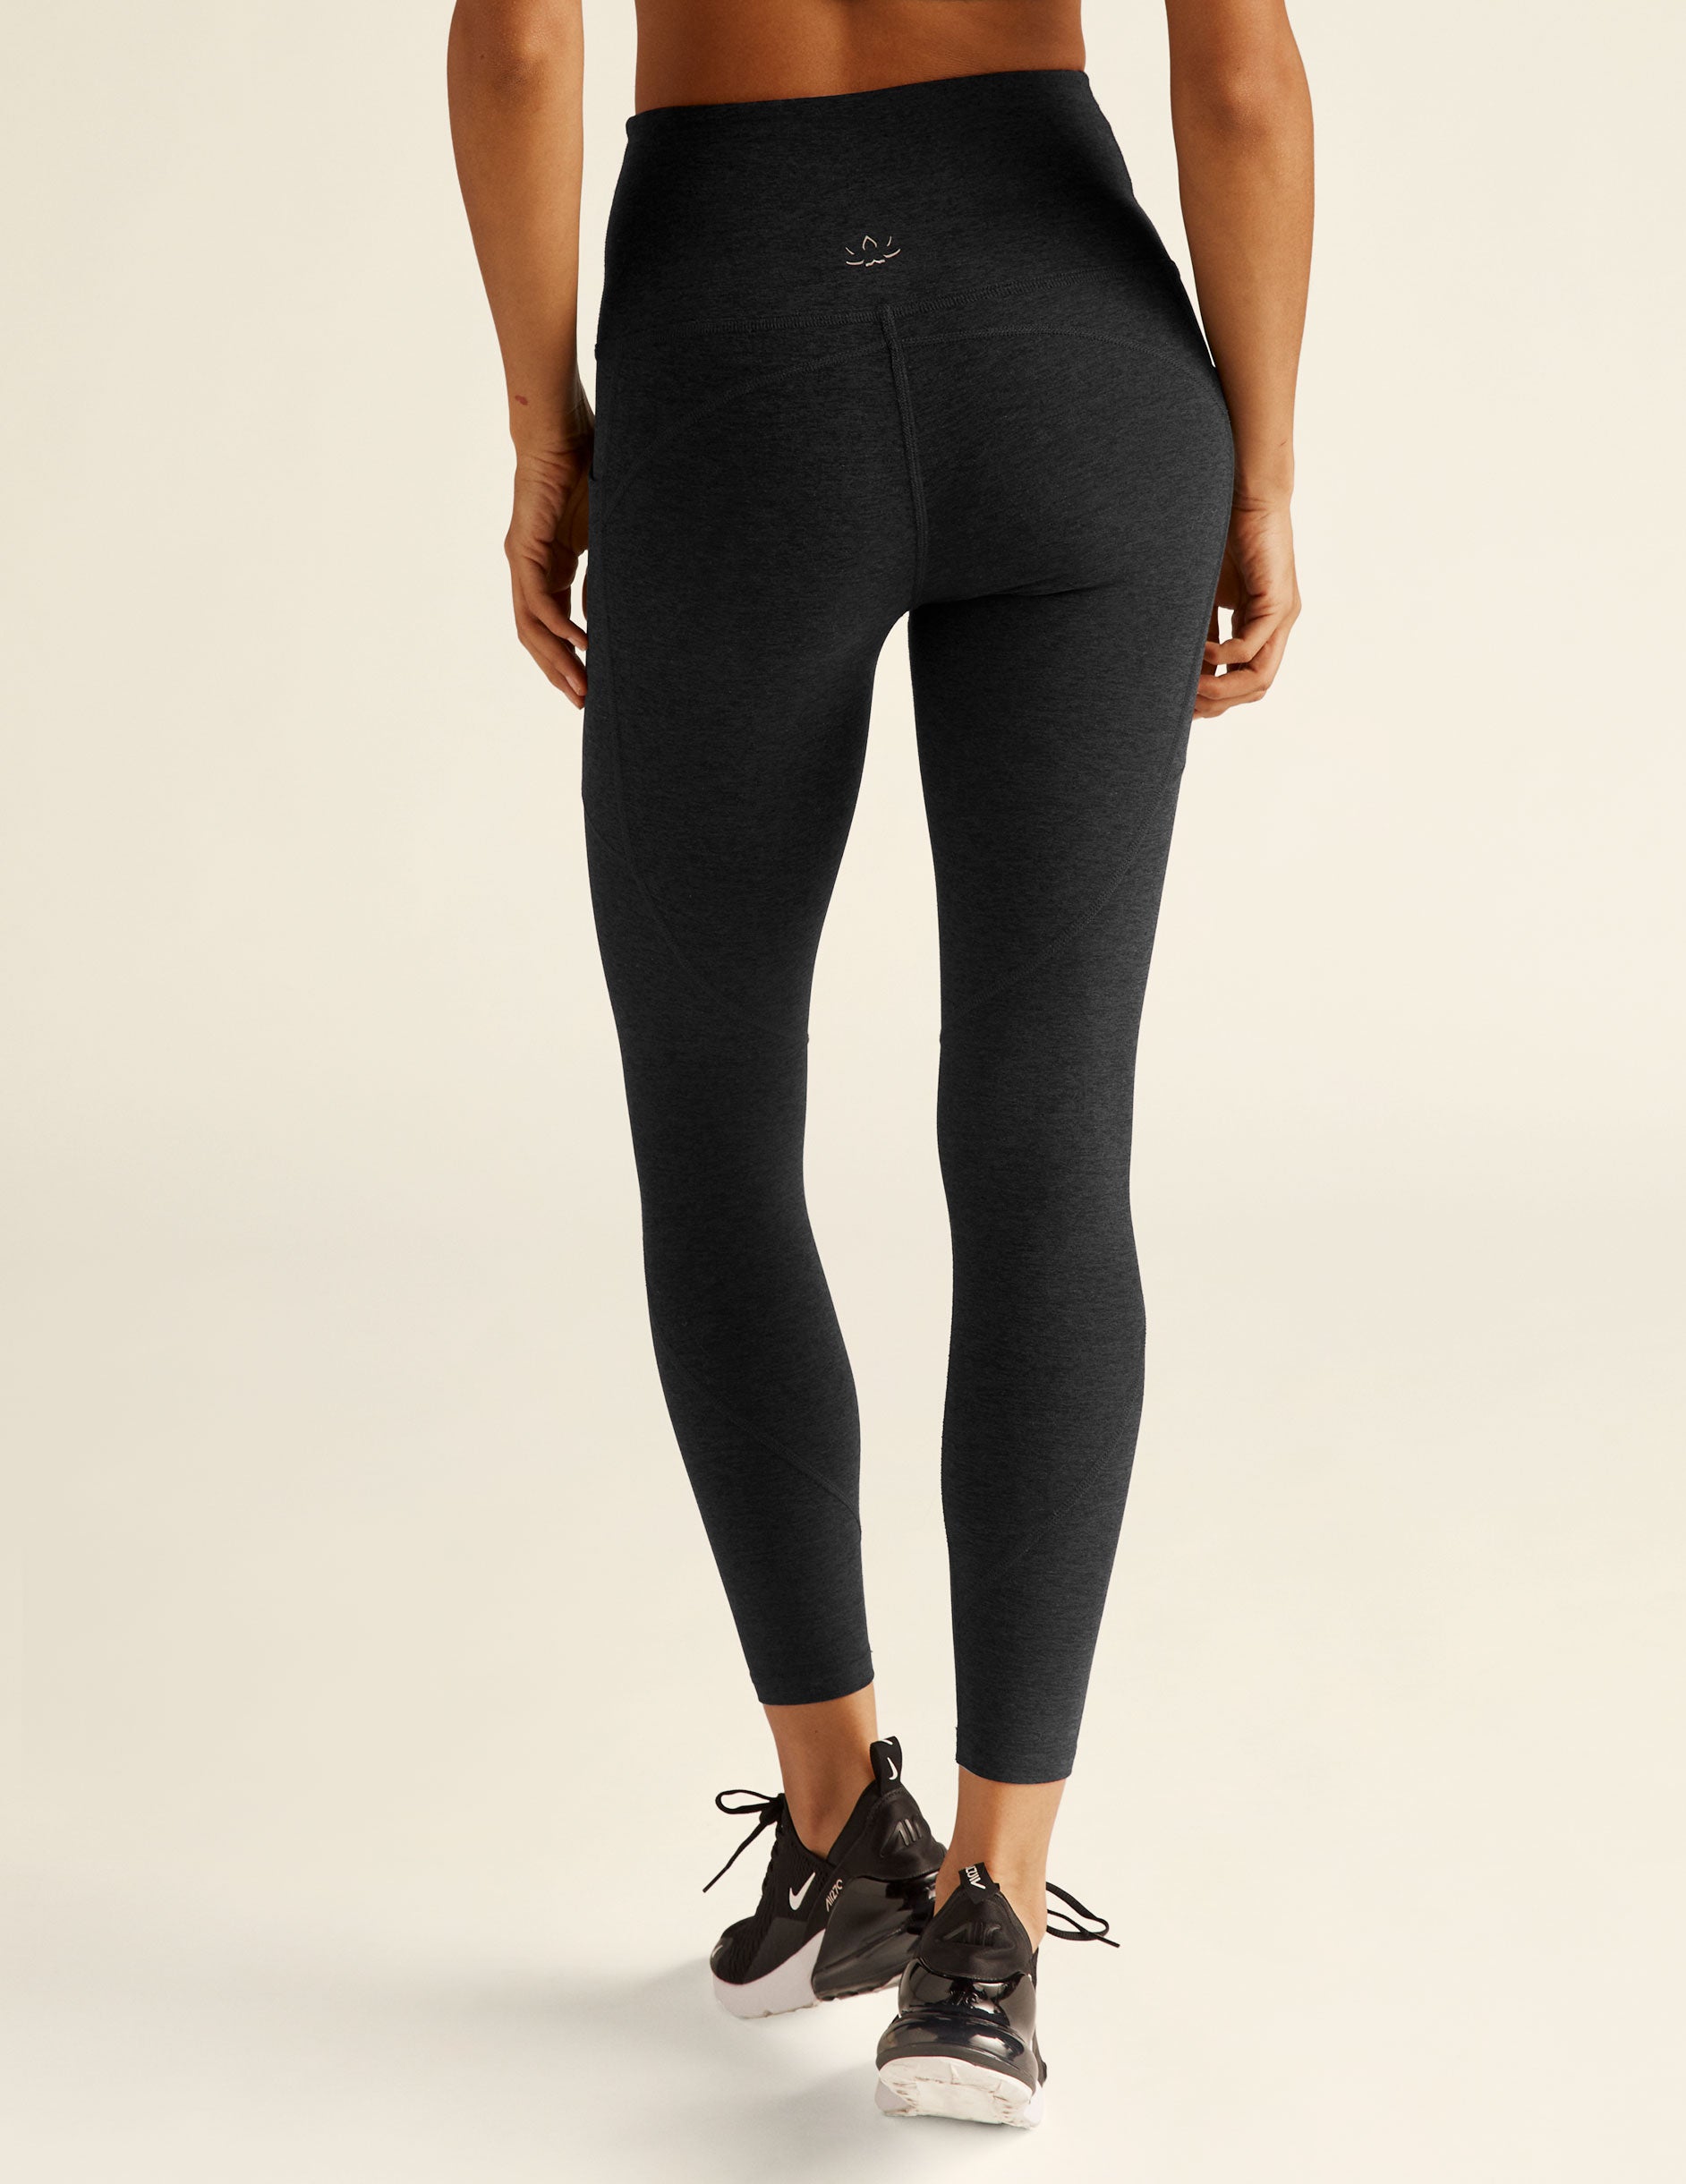 black high-waisted leggings with side pockets. midi length, stops right above ankle. 